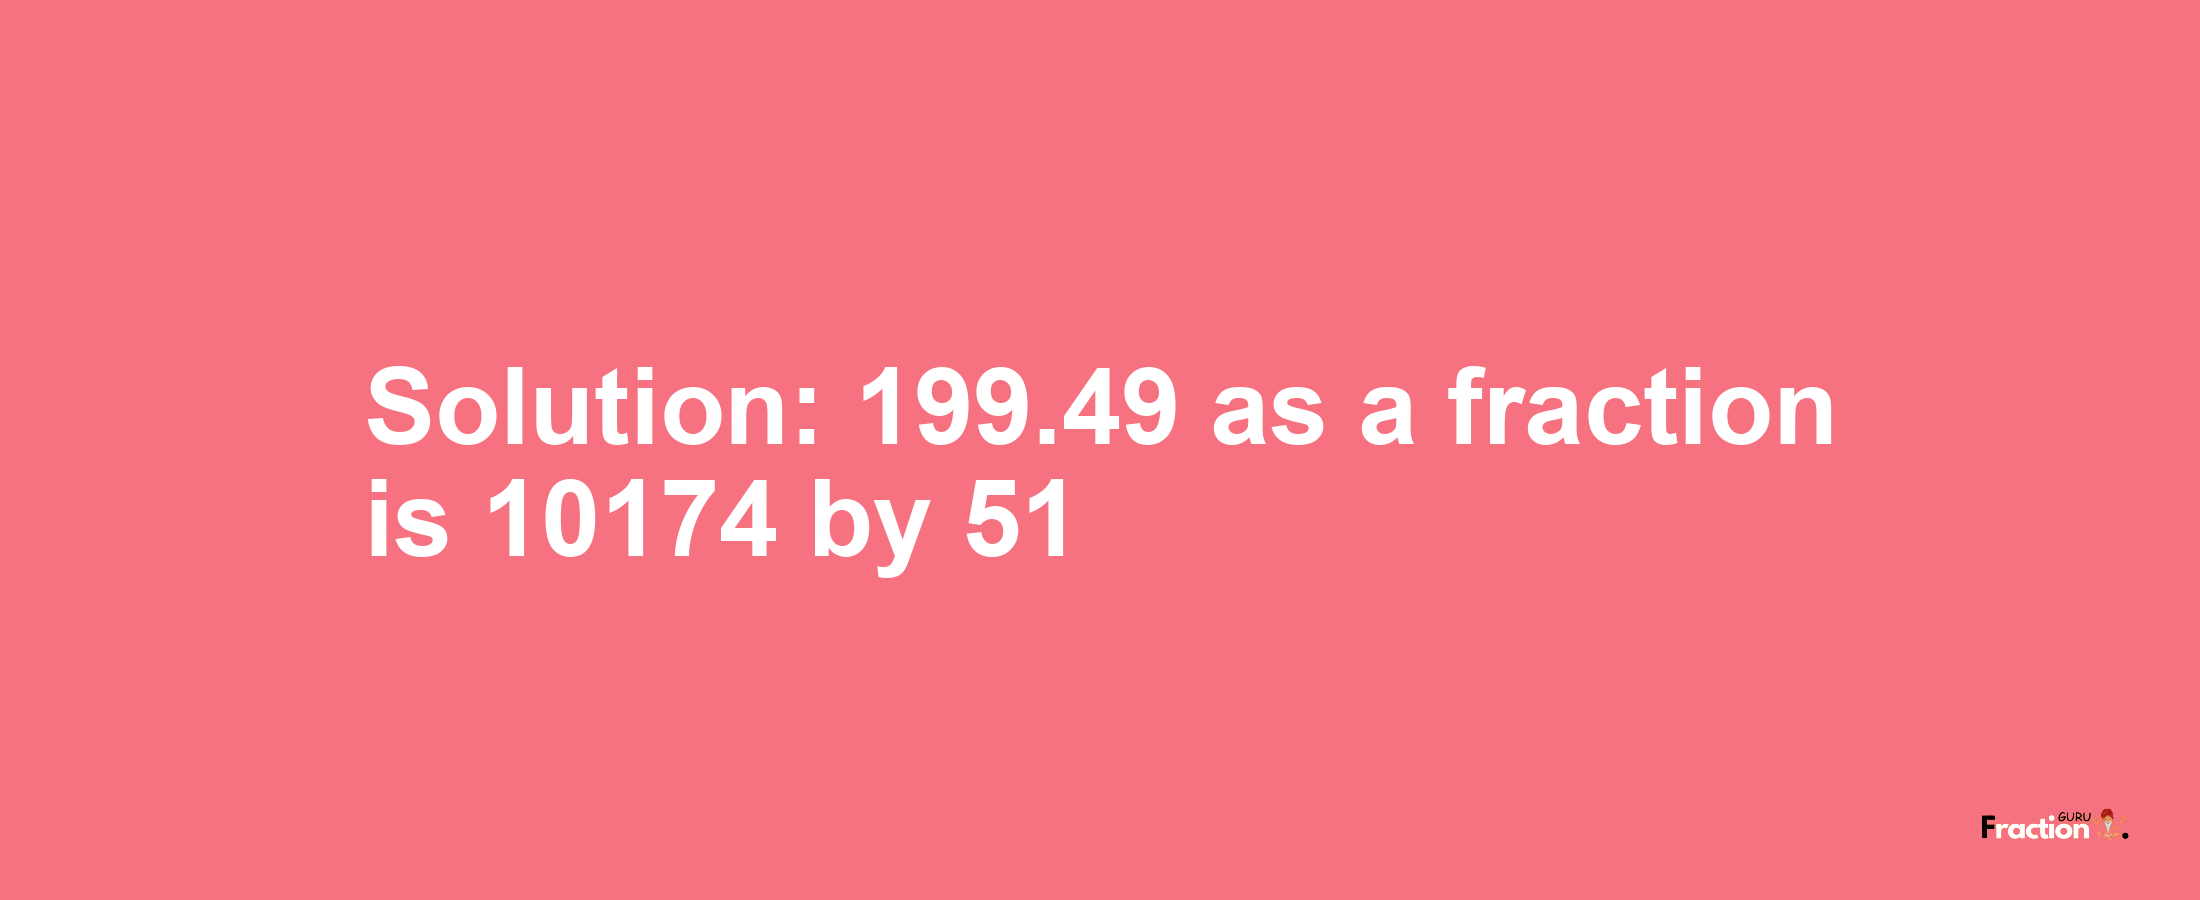 Solution:199.49 as a fraction is 10174/51